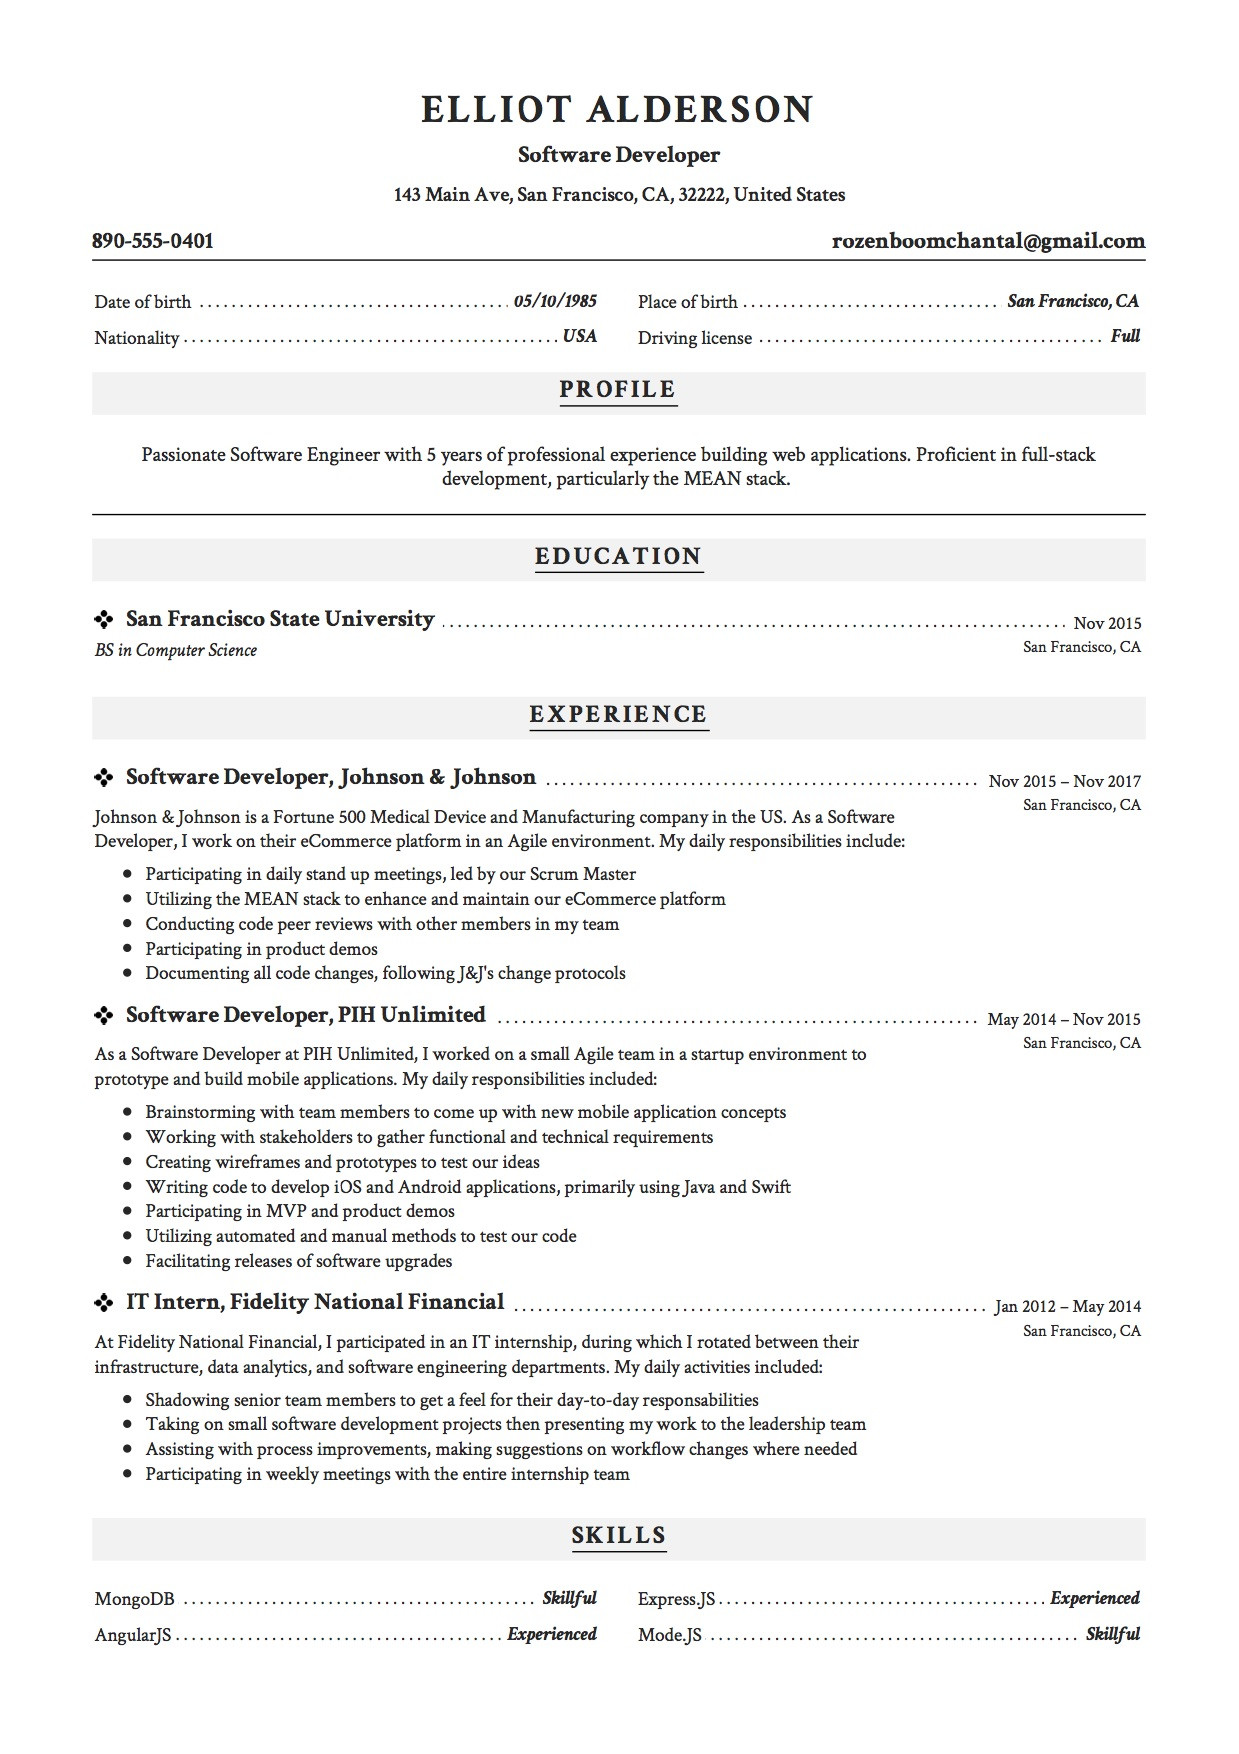 System Administrator Sample Resume 3 Years Experience Sample Resume for software Engineer with 3 Years